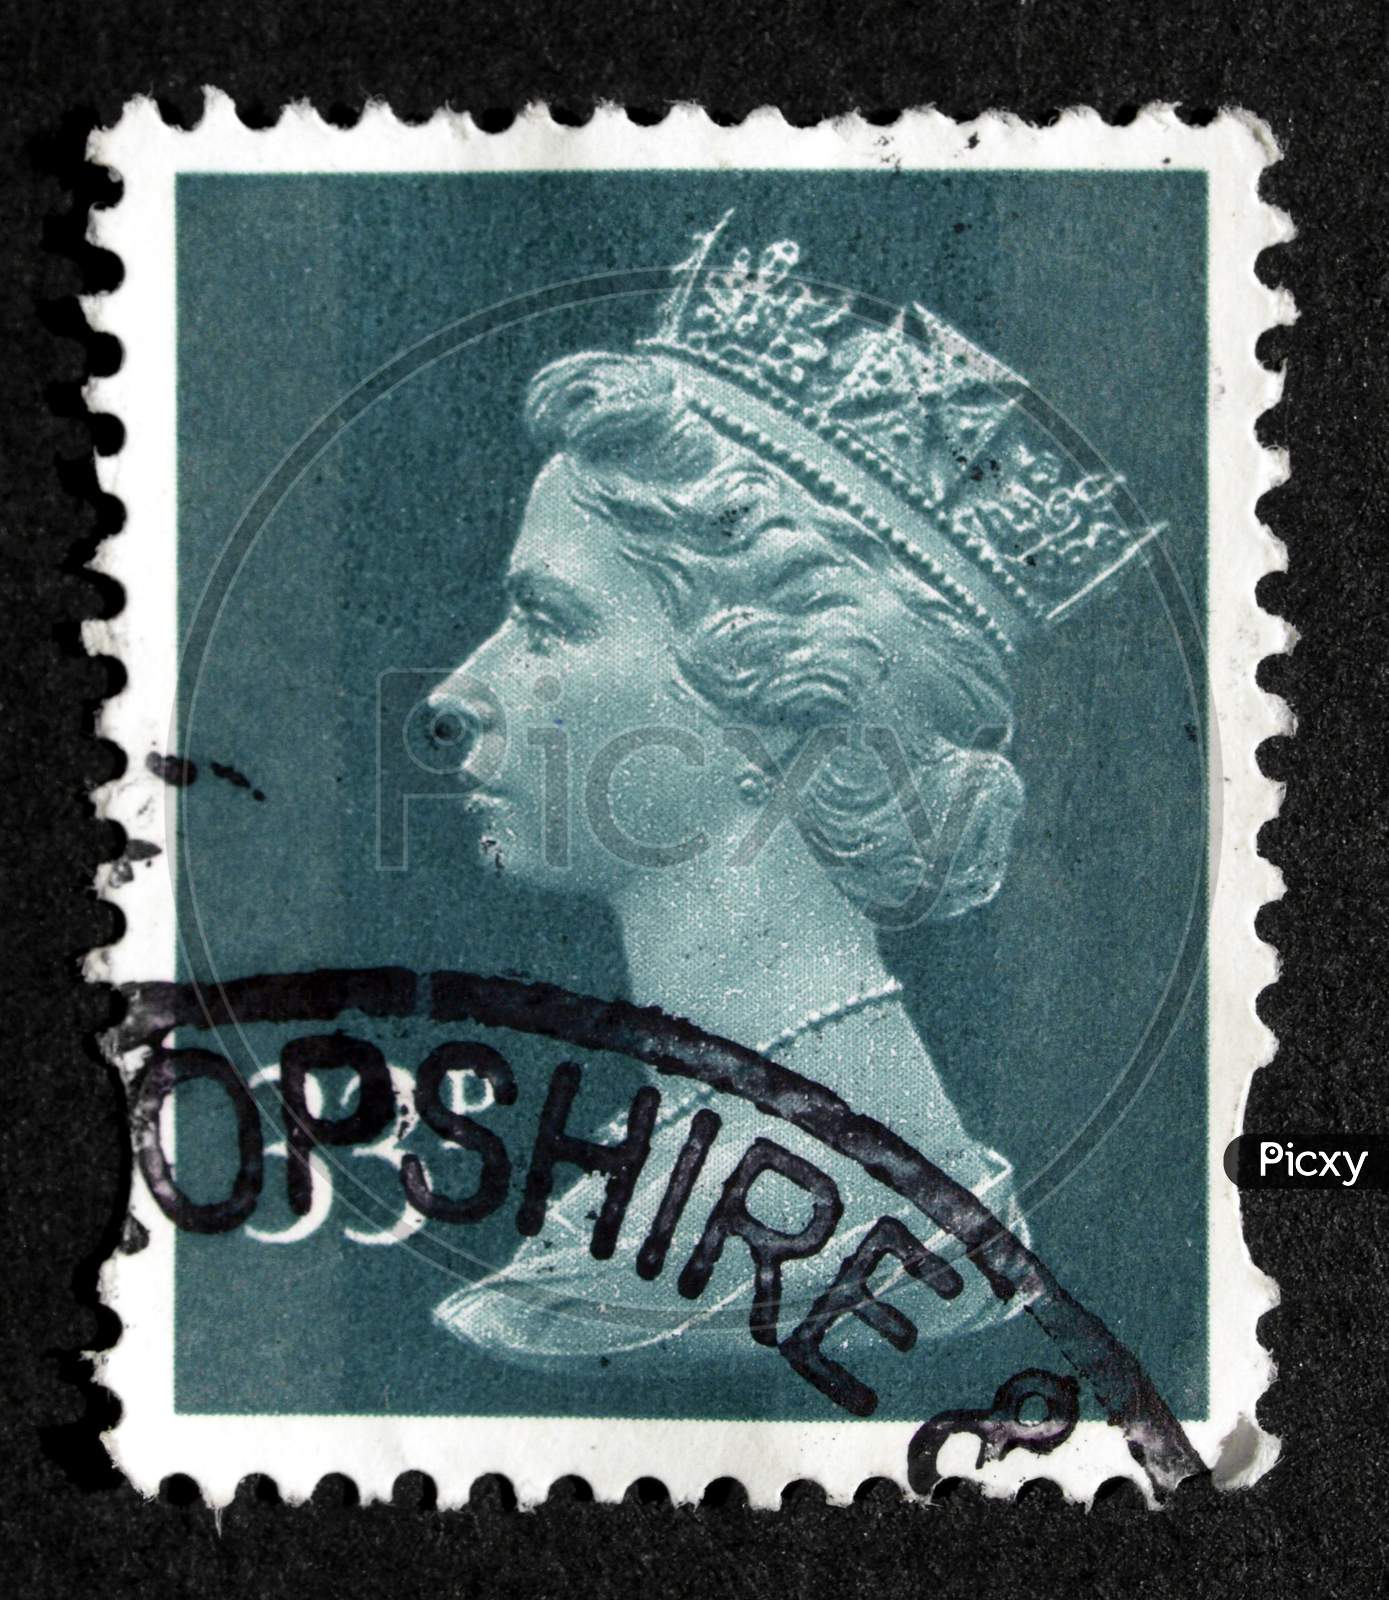 London, Uk - September 15, 2008: British Postage Stamp With Hm The Queen Elizabeth Ii